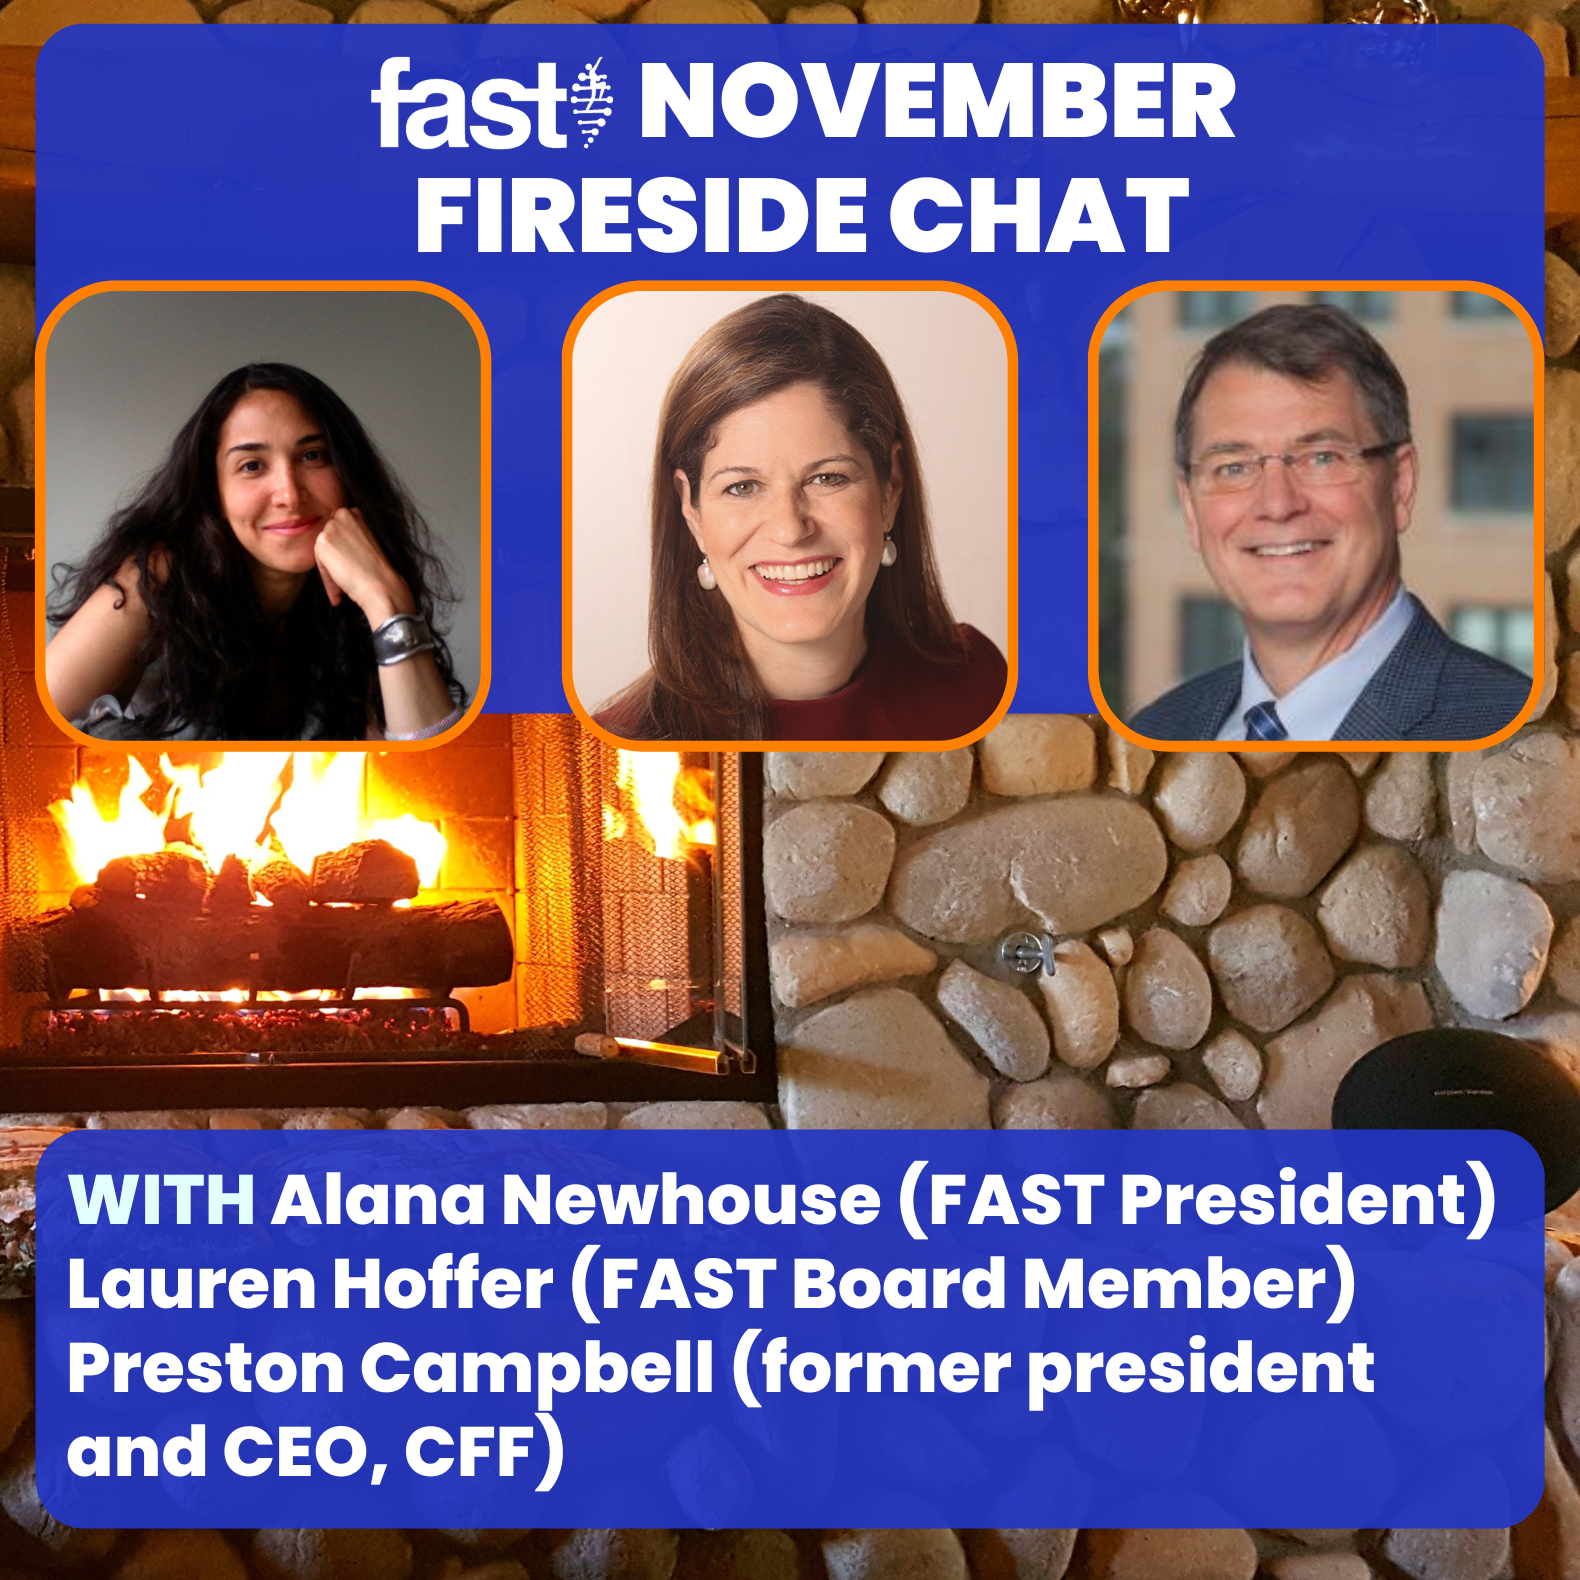 FAST November Fireside Chat with Alana Newhouse, Lauren Hoffer, and Preston Campbell